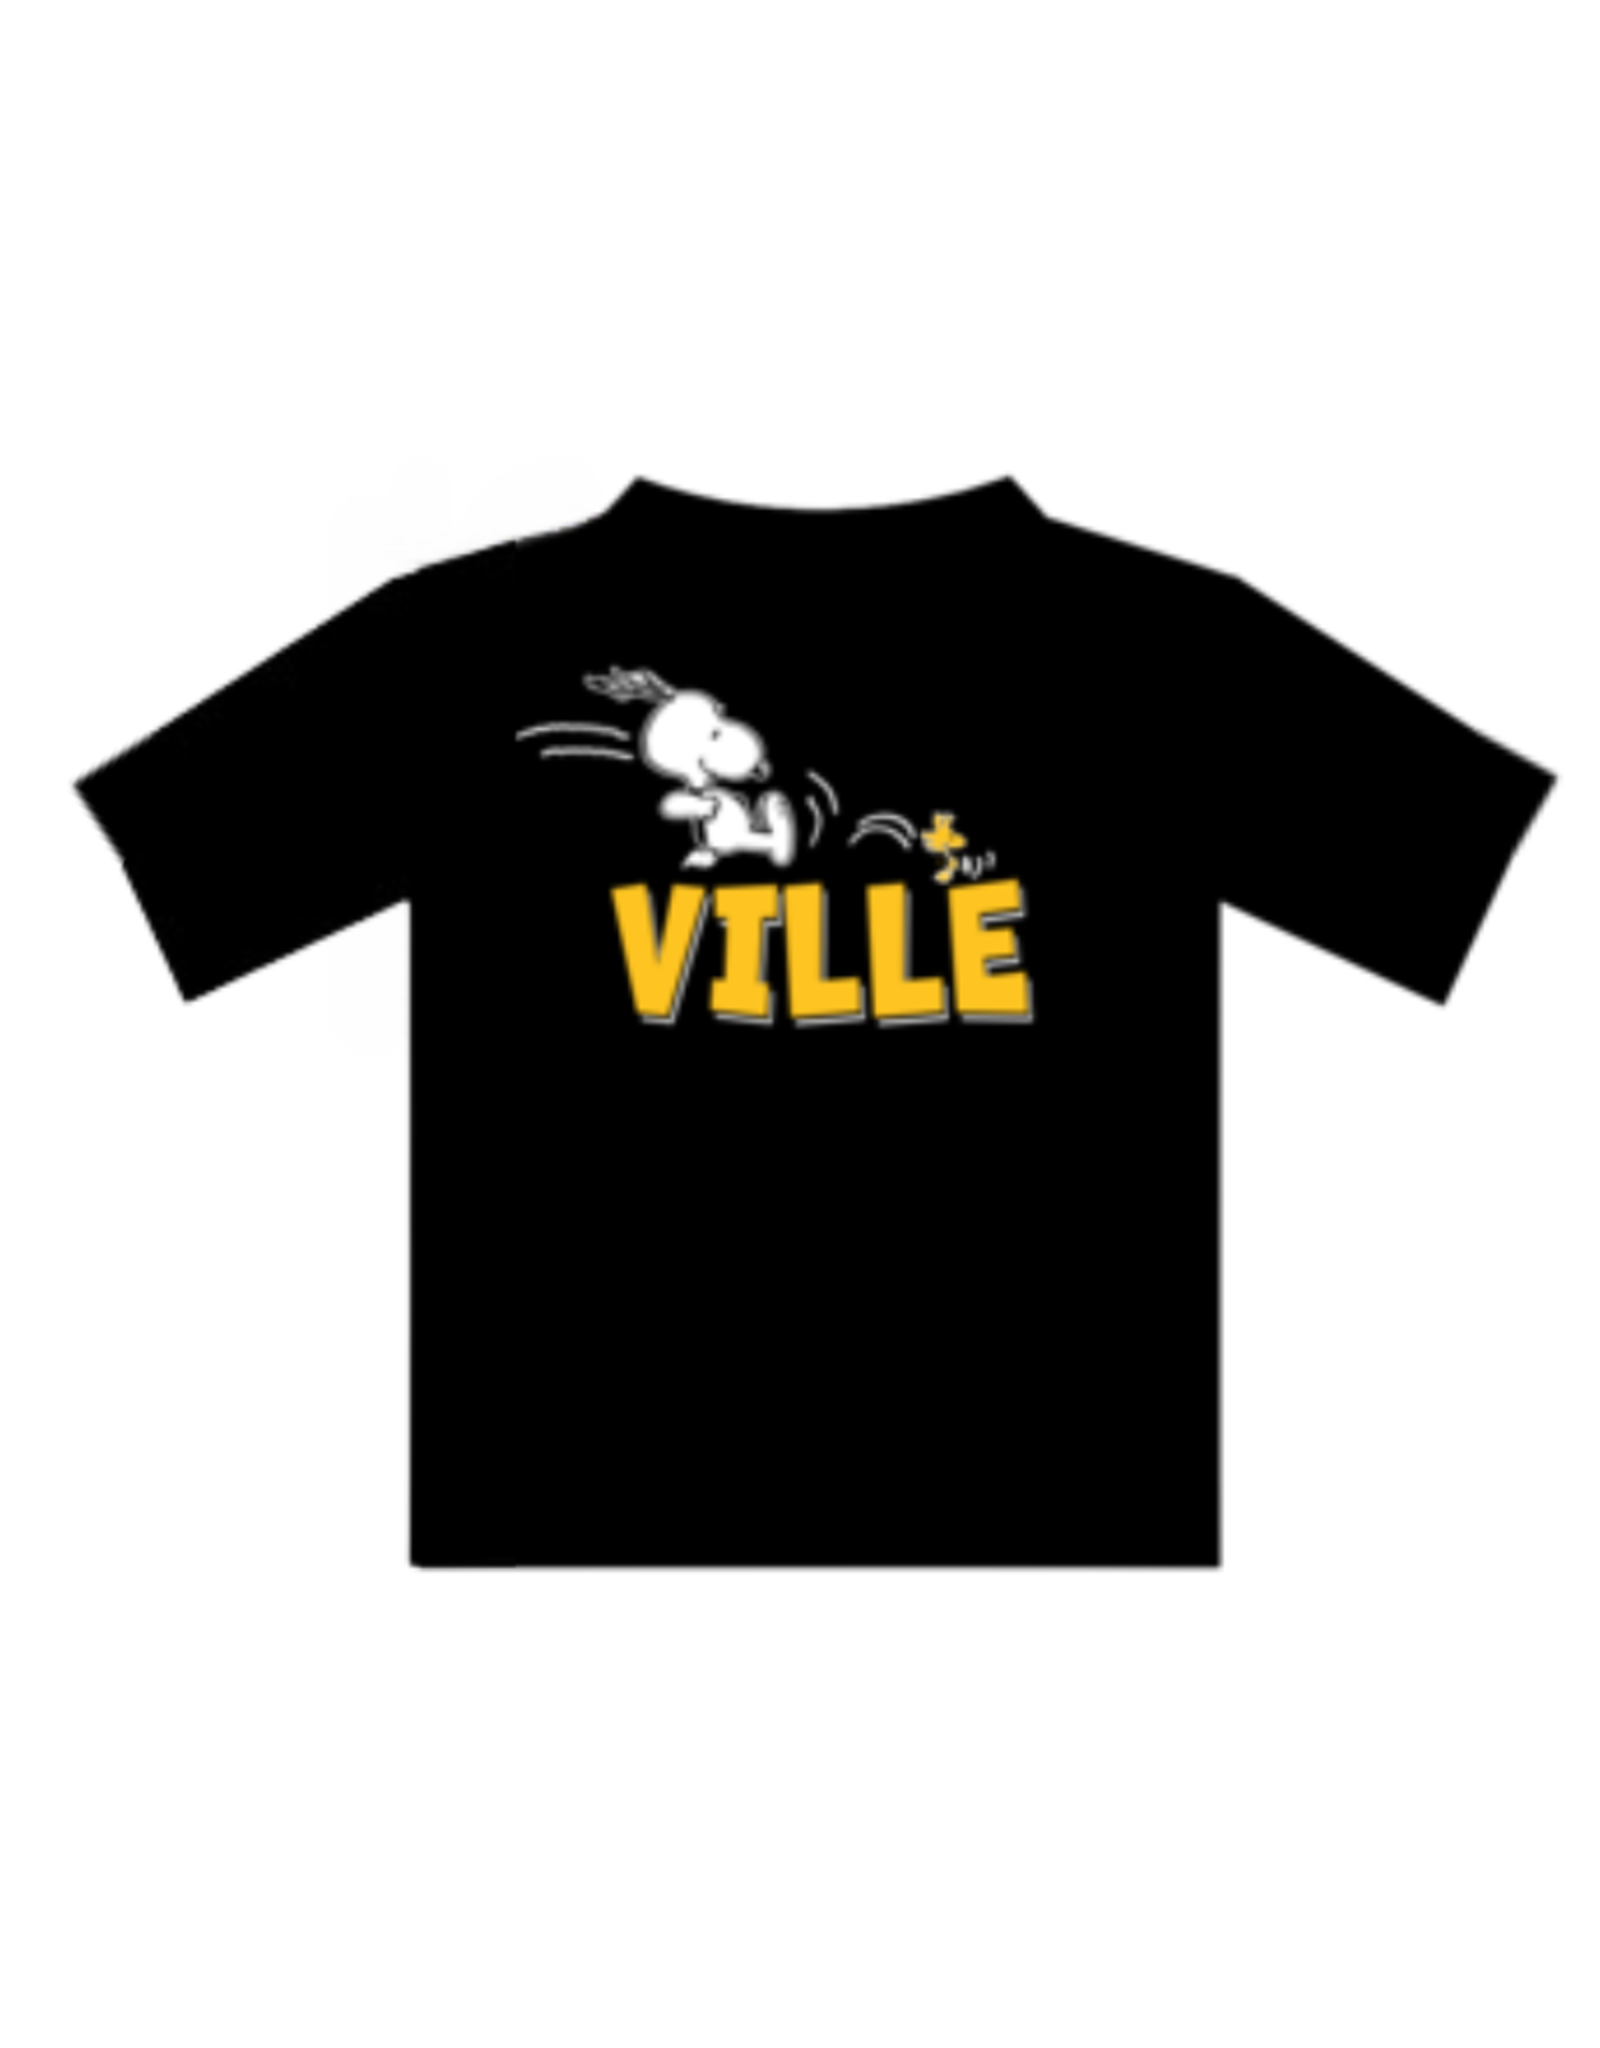 Youth Snoopy Ville Tee